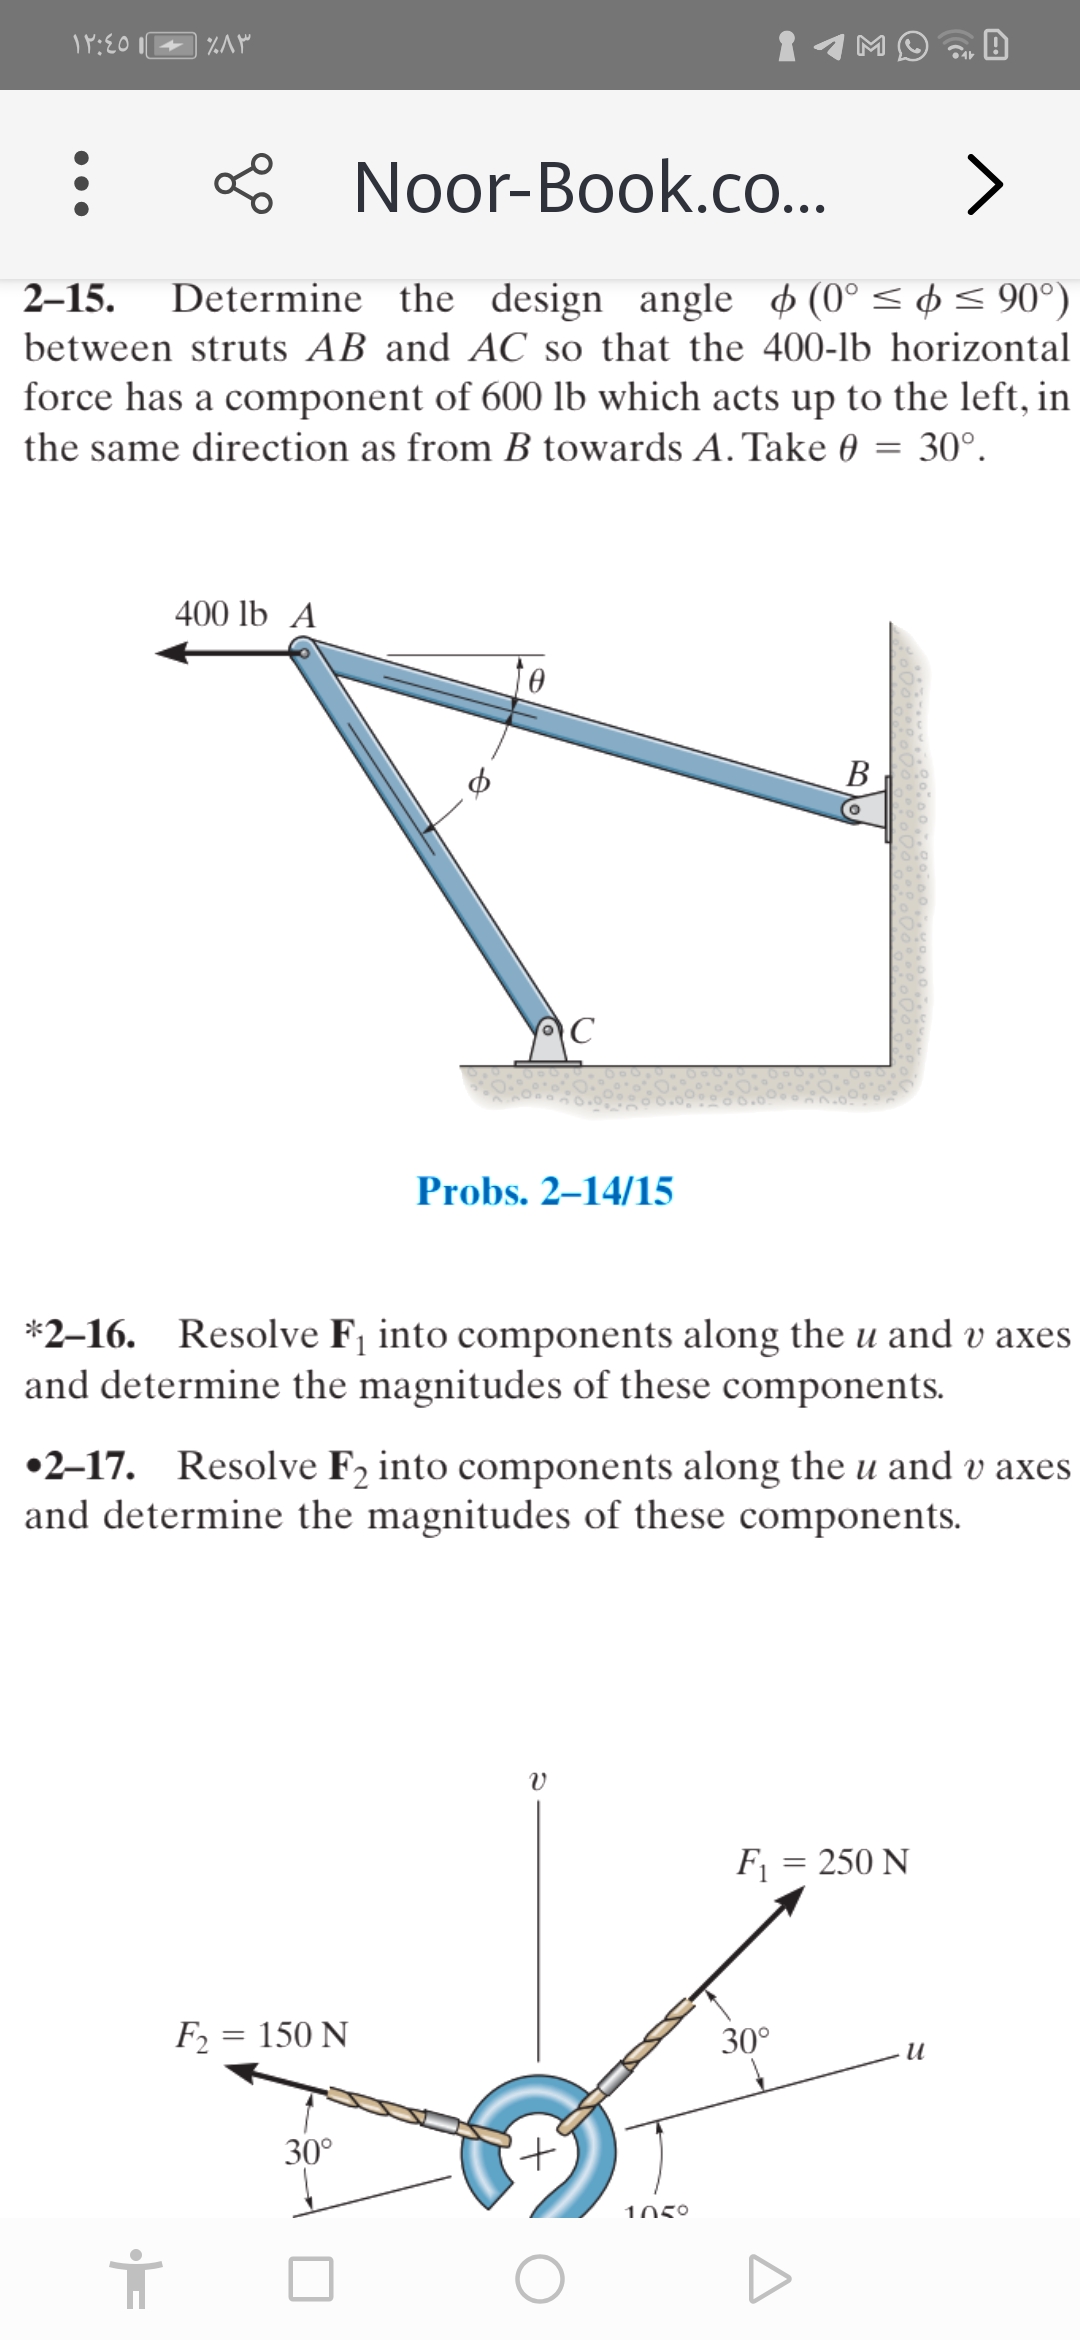 1MO
Noor-Book.co...
>
Determine the design angle (0° < ¢ < 90°)
between struts AB and AC so that the 400-lb horizontal
force has a component of 600 lb which acts up to the left, in
2–15.
the same direction as from B towards A. Take 0 = 30°.
400 lb A
to
В
C
Probs. 2–14/15
*2-16. Resolve F¡ into components along the u and v axes
and determine the magnitudes of these components.
•2-17. Resolve F2 into components along the u and v axes
and determine the magnitudes of these components.
F1 = 250 N
F2 = 150 N
30°
и
30°
1050
